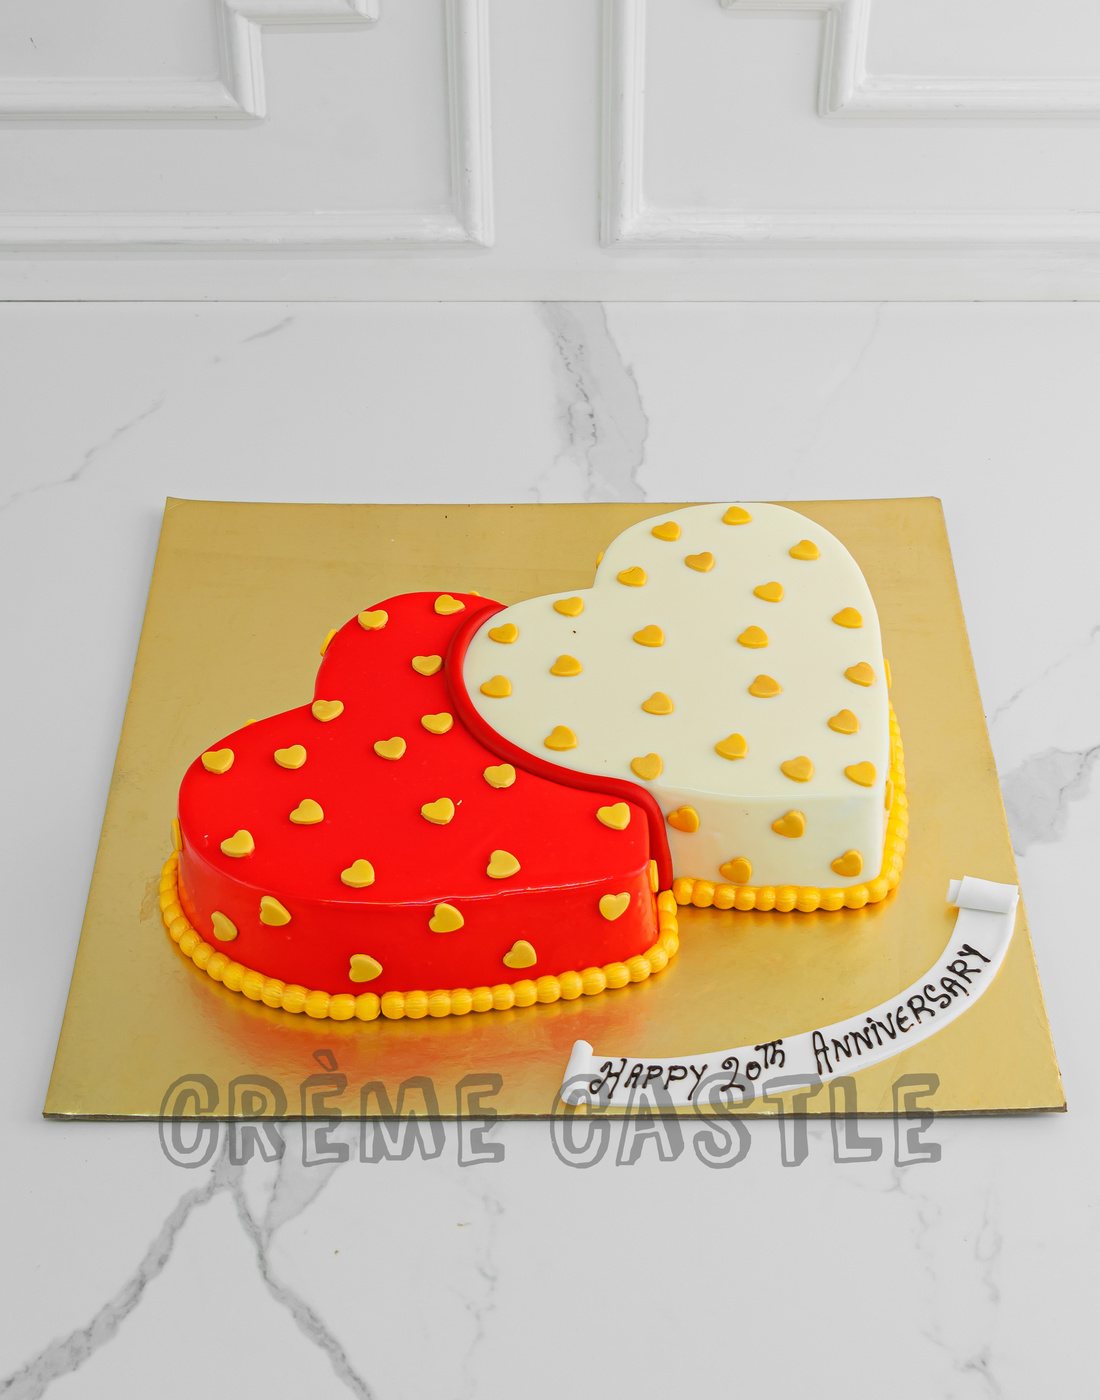 Double Heart Cakes For Ring Ceremonies Wedding Anniversary